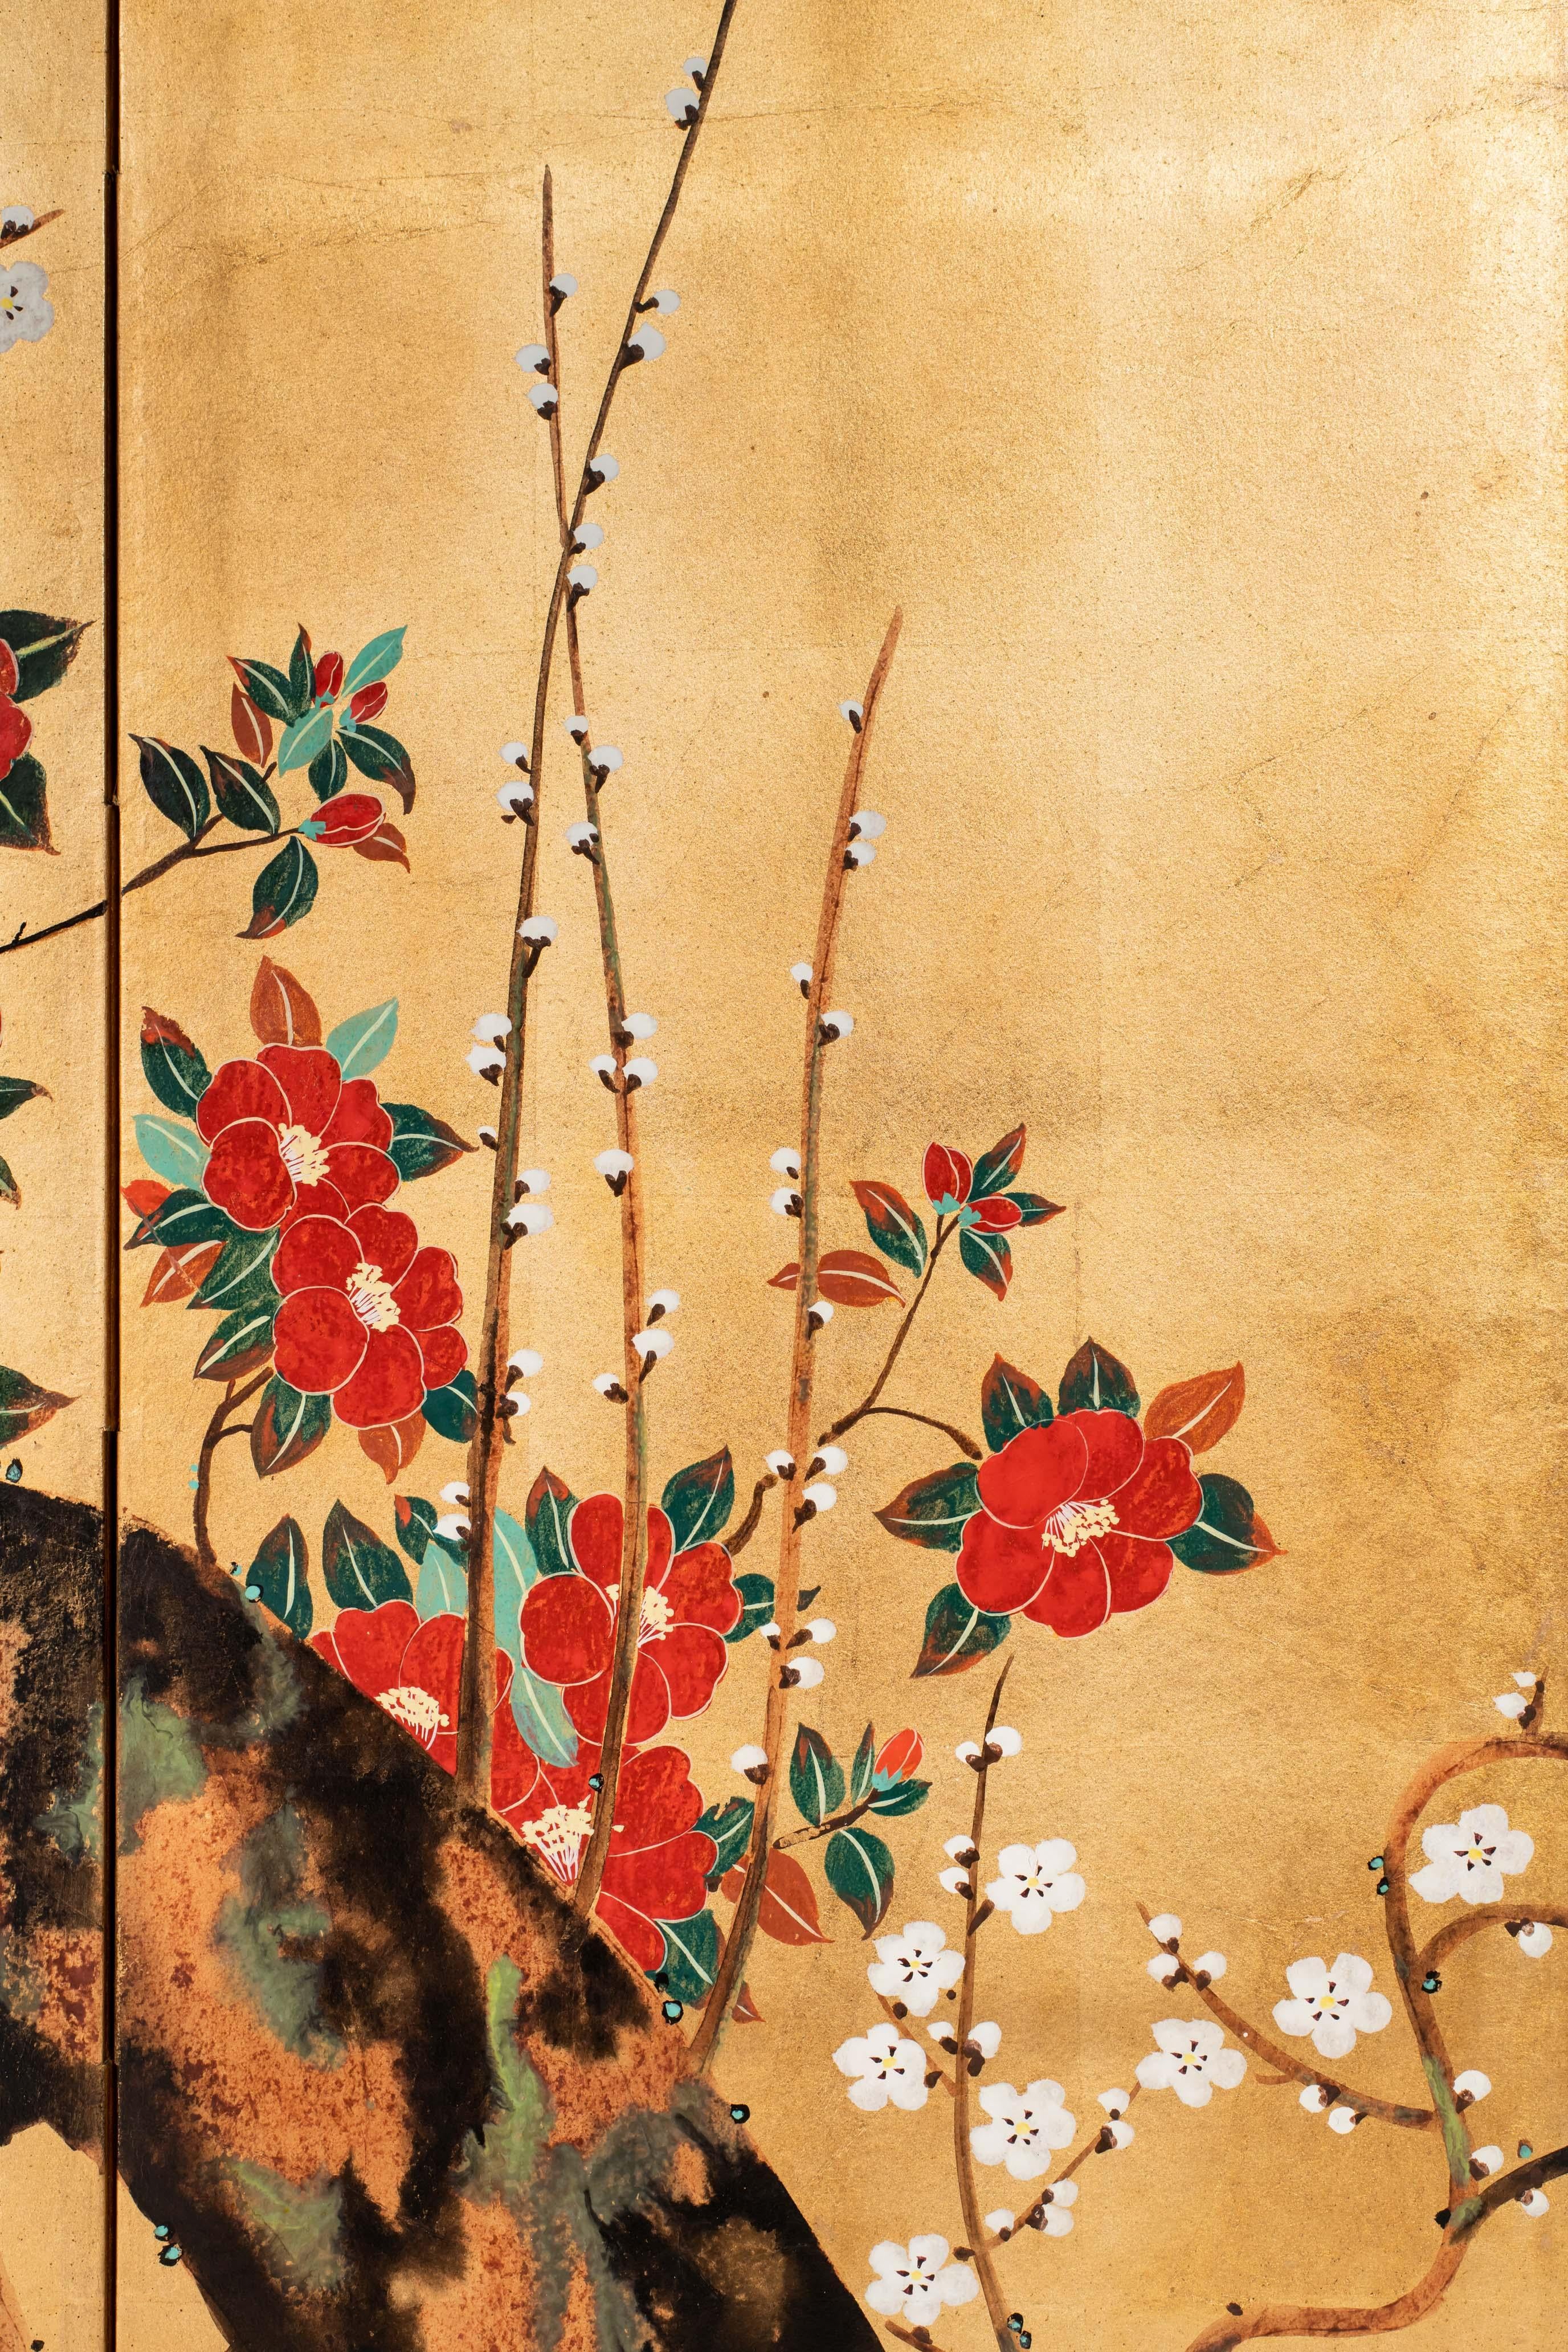 Hand-Crafted Contemporary Hand-Painted Japanese Screen of Red and White Plum Blossom